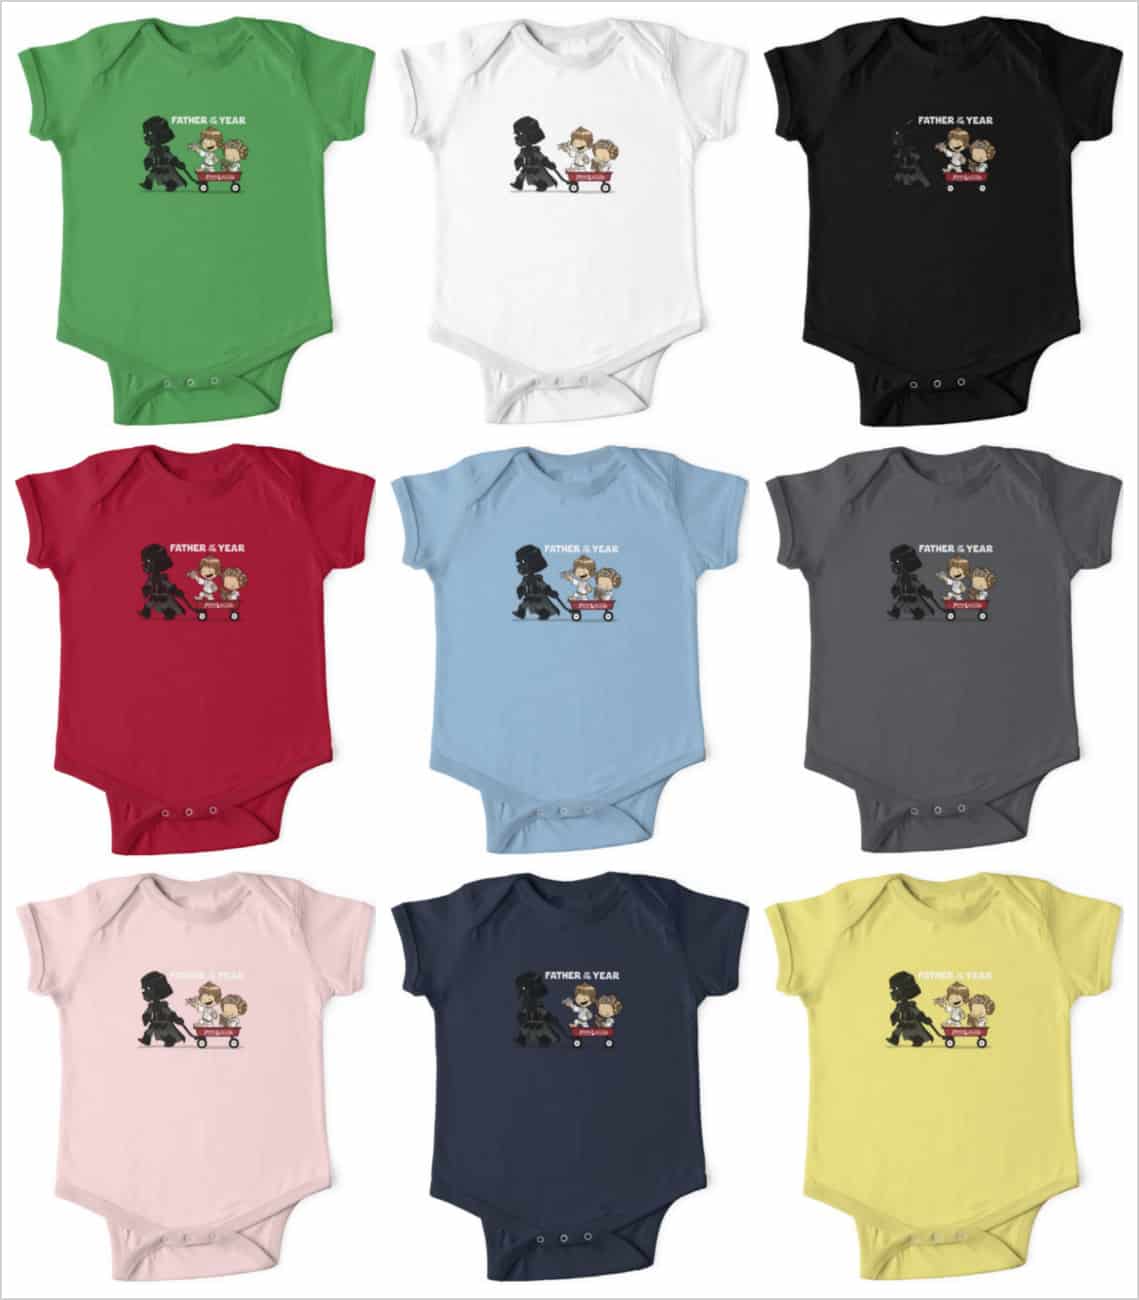 Star Wars onesie in lots of different colors